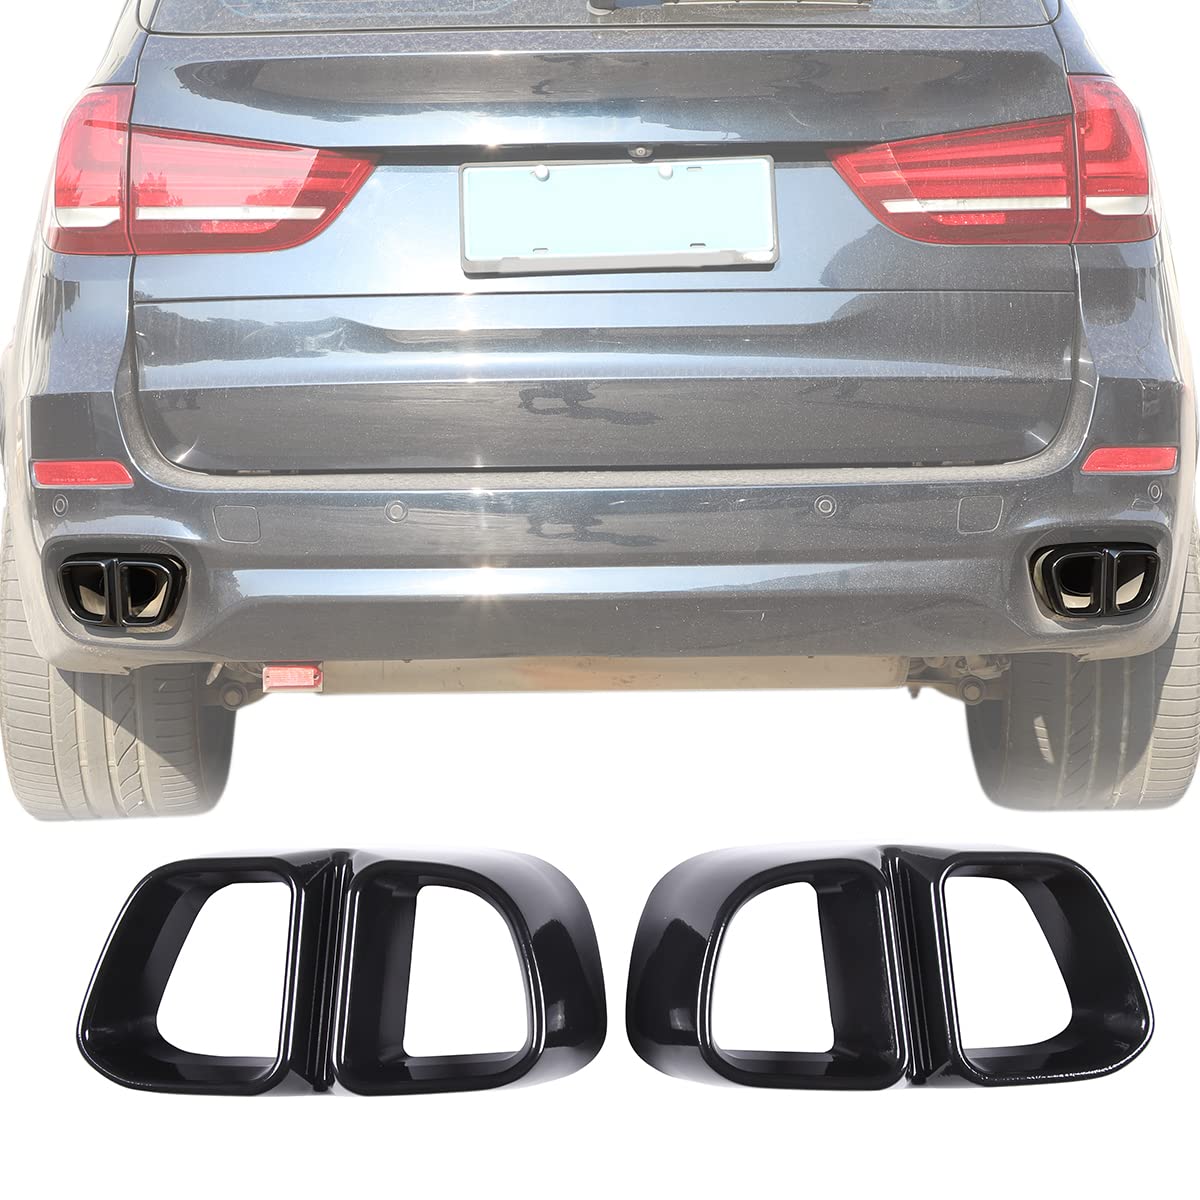 Aluminum Alloy Exterior Accessories Exhaust Muffler Tail Pipe Trim Cover For BMW X5 F15 X6 F16 2014-2019(Suitable For M Sports Version) (Bright Black)